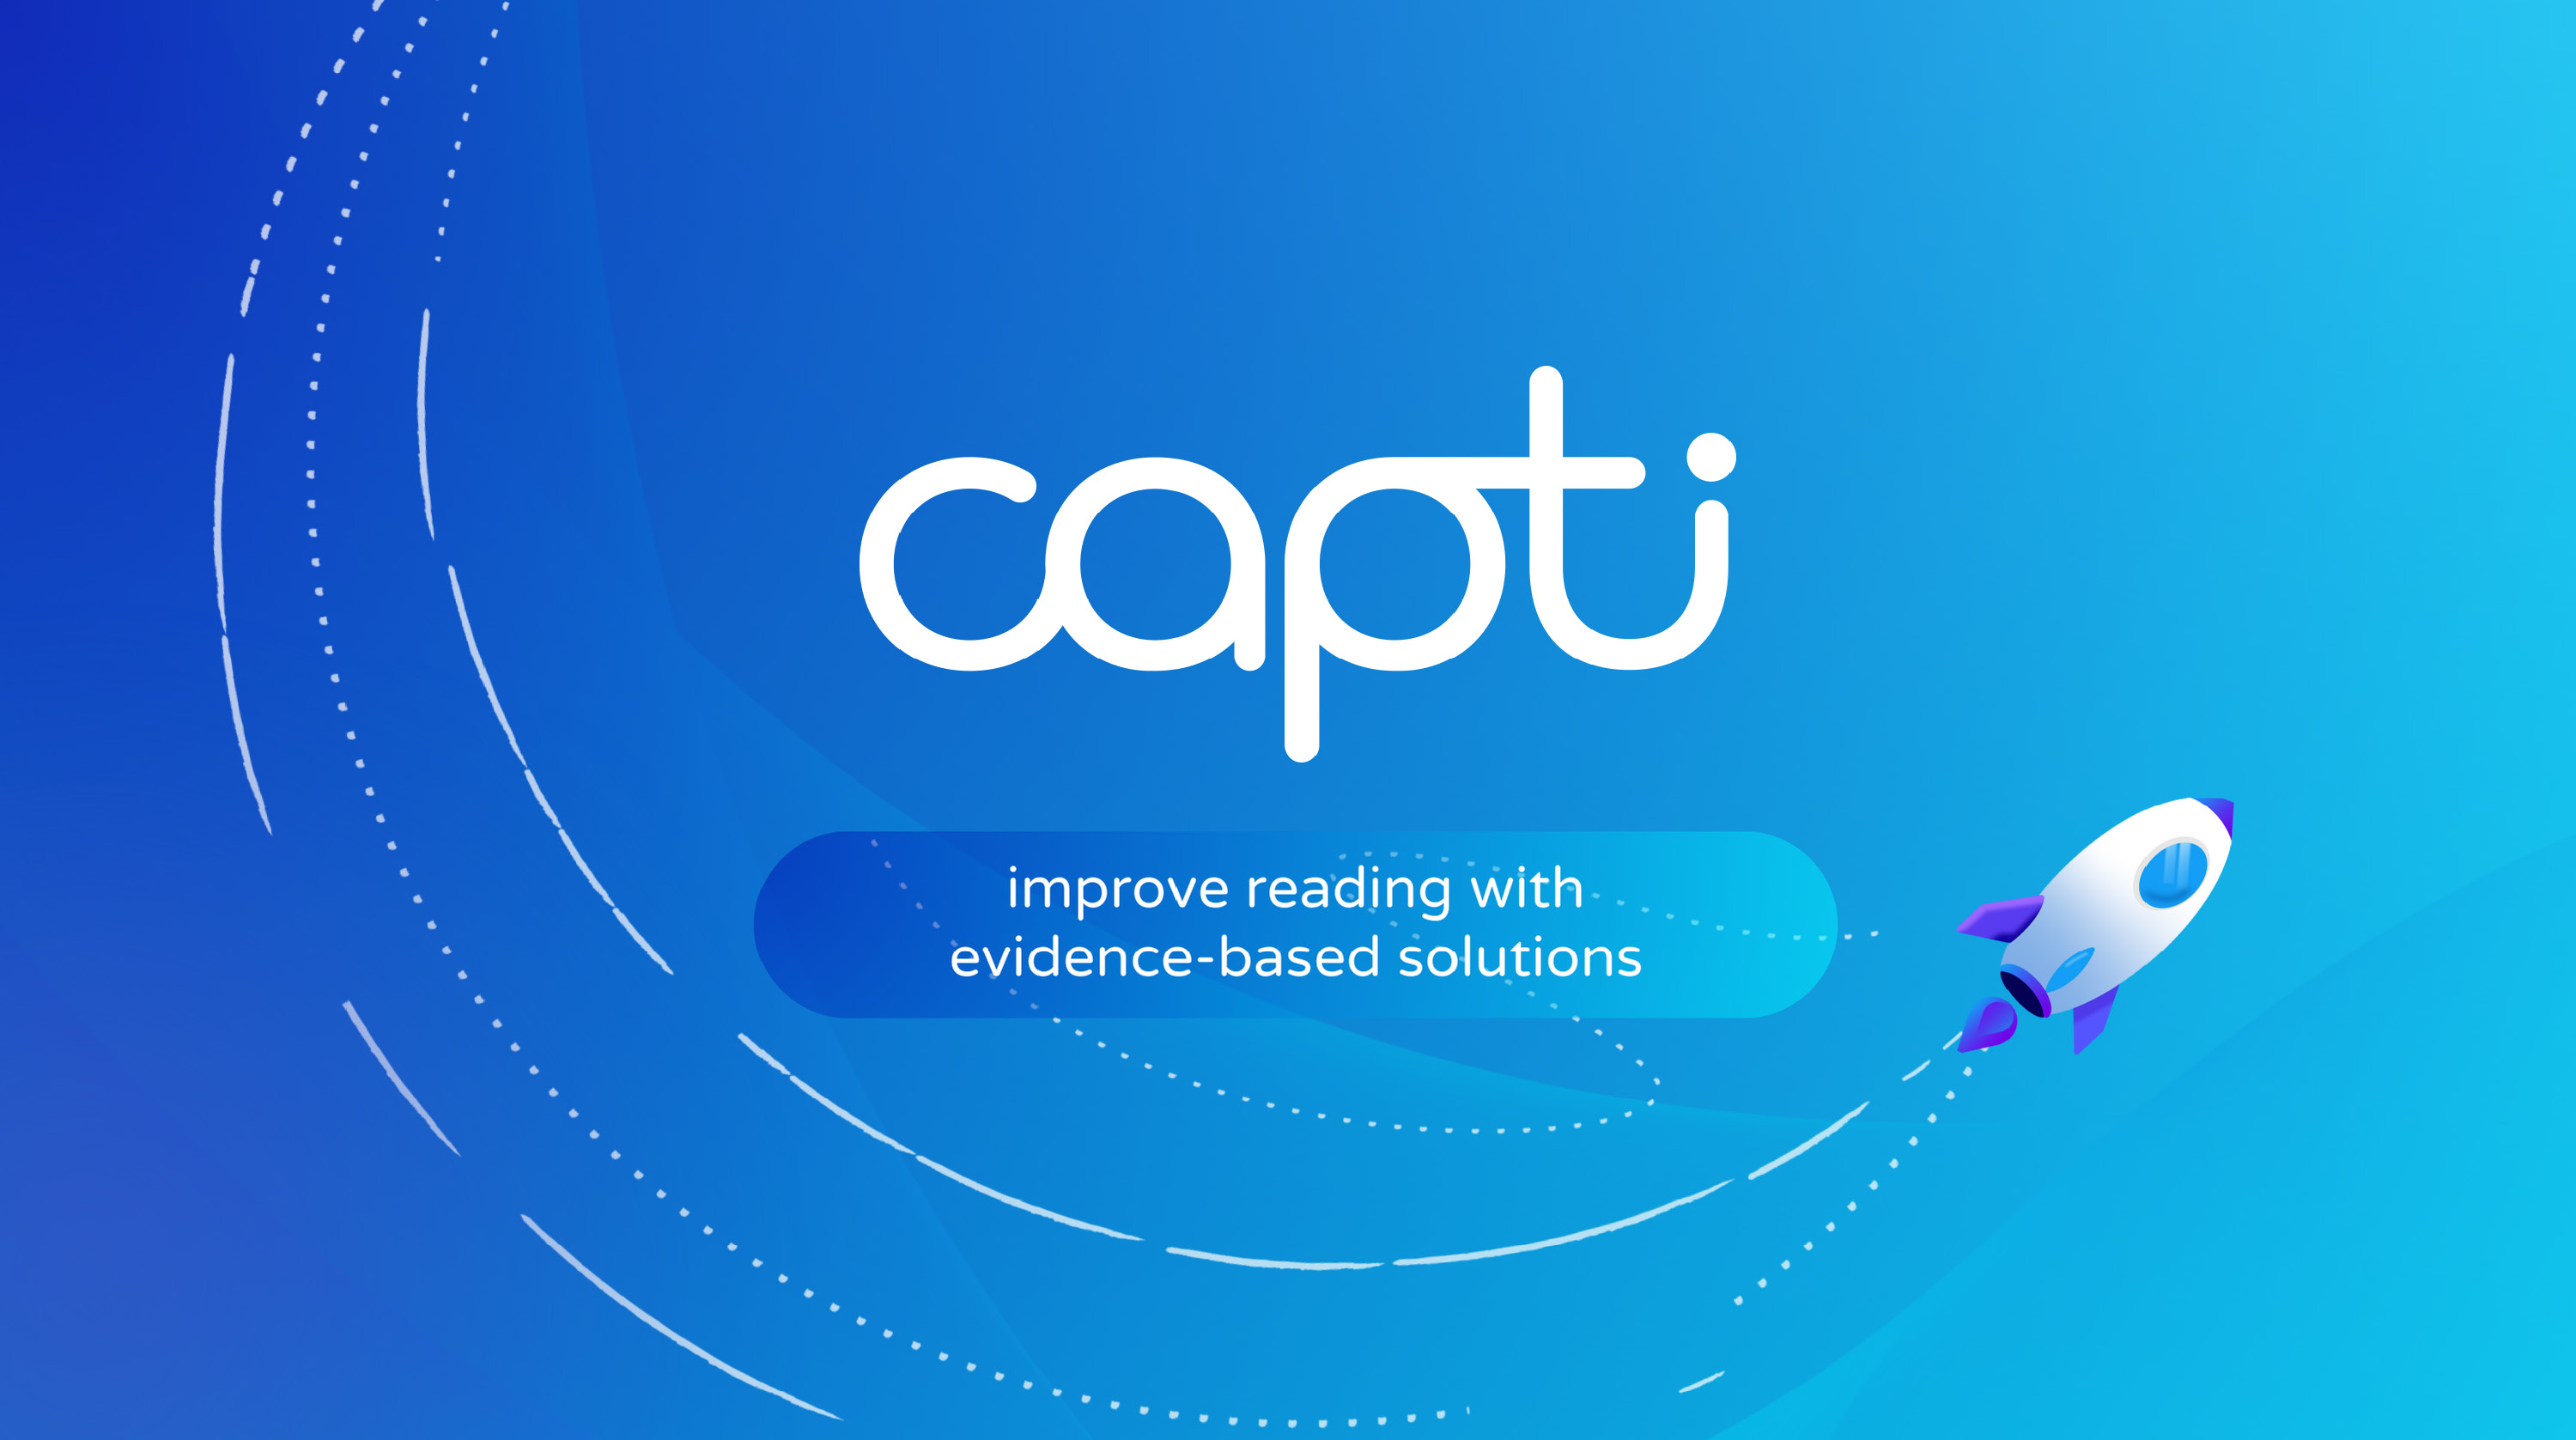 Capti Improve Students’ Reading With Evidence-Based Solutions by Tania Markina